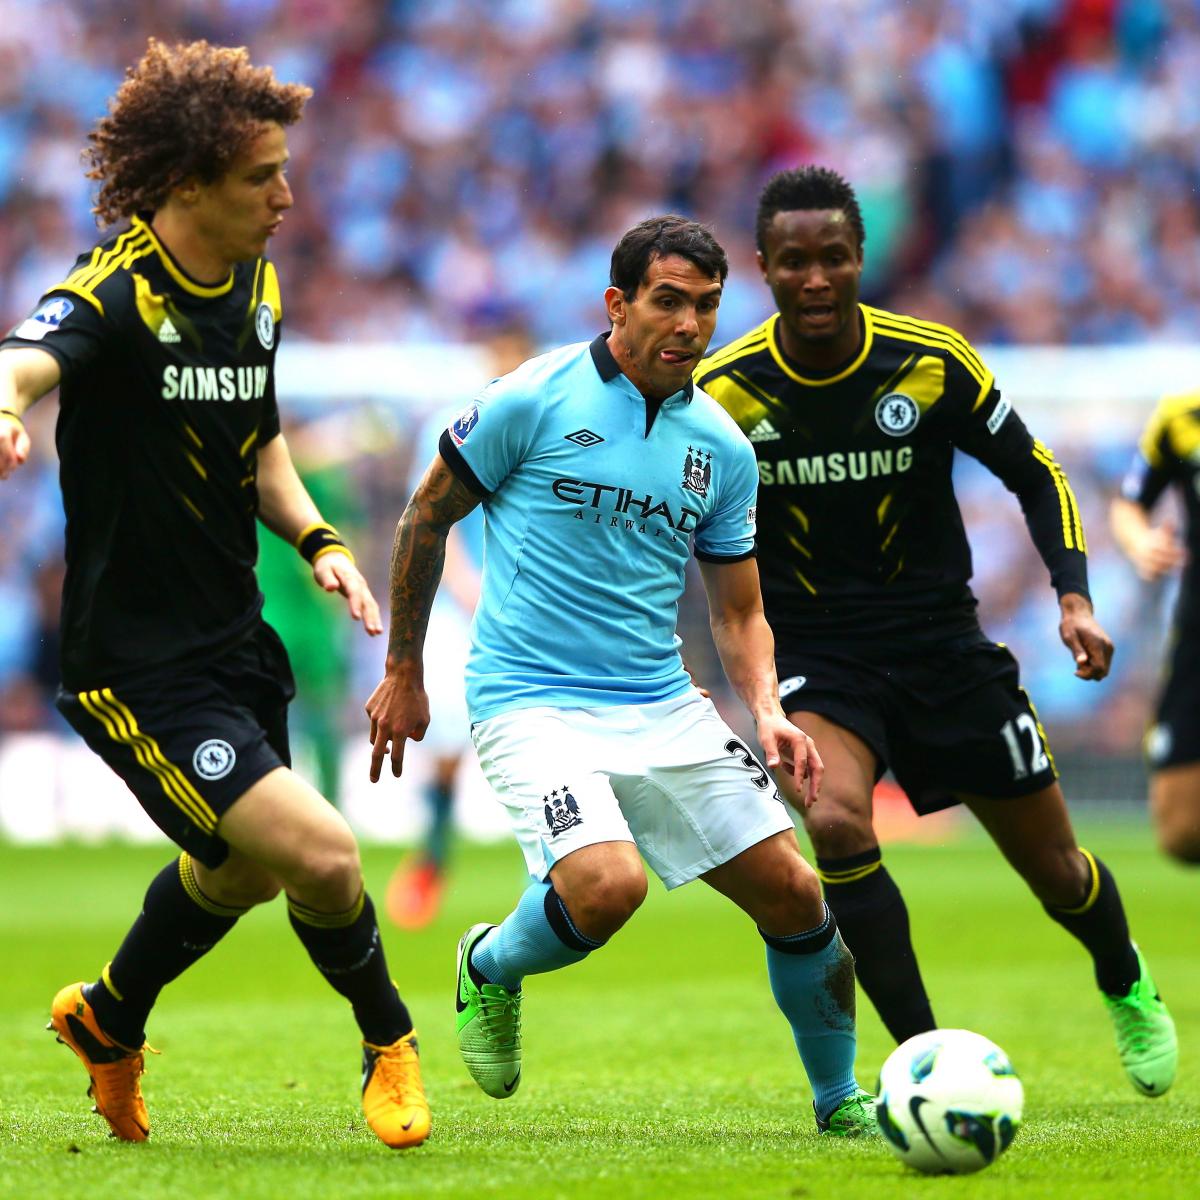 Chelsea vs. Manchester City FA Cup Semifinal Live Score, Highlights